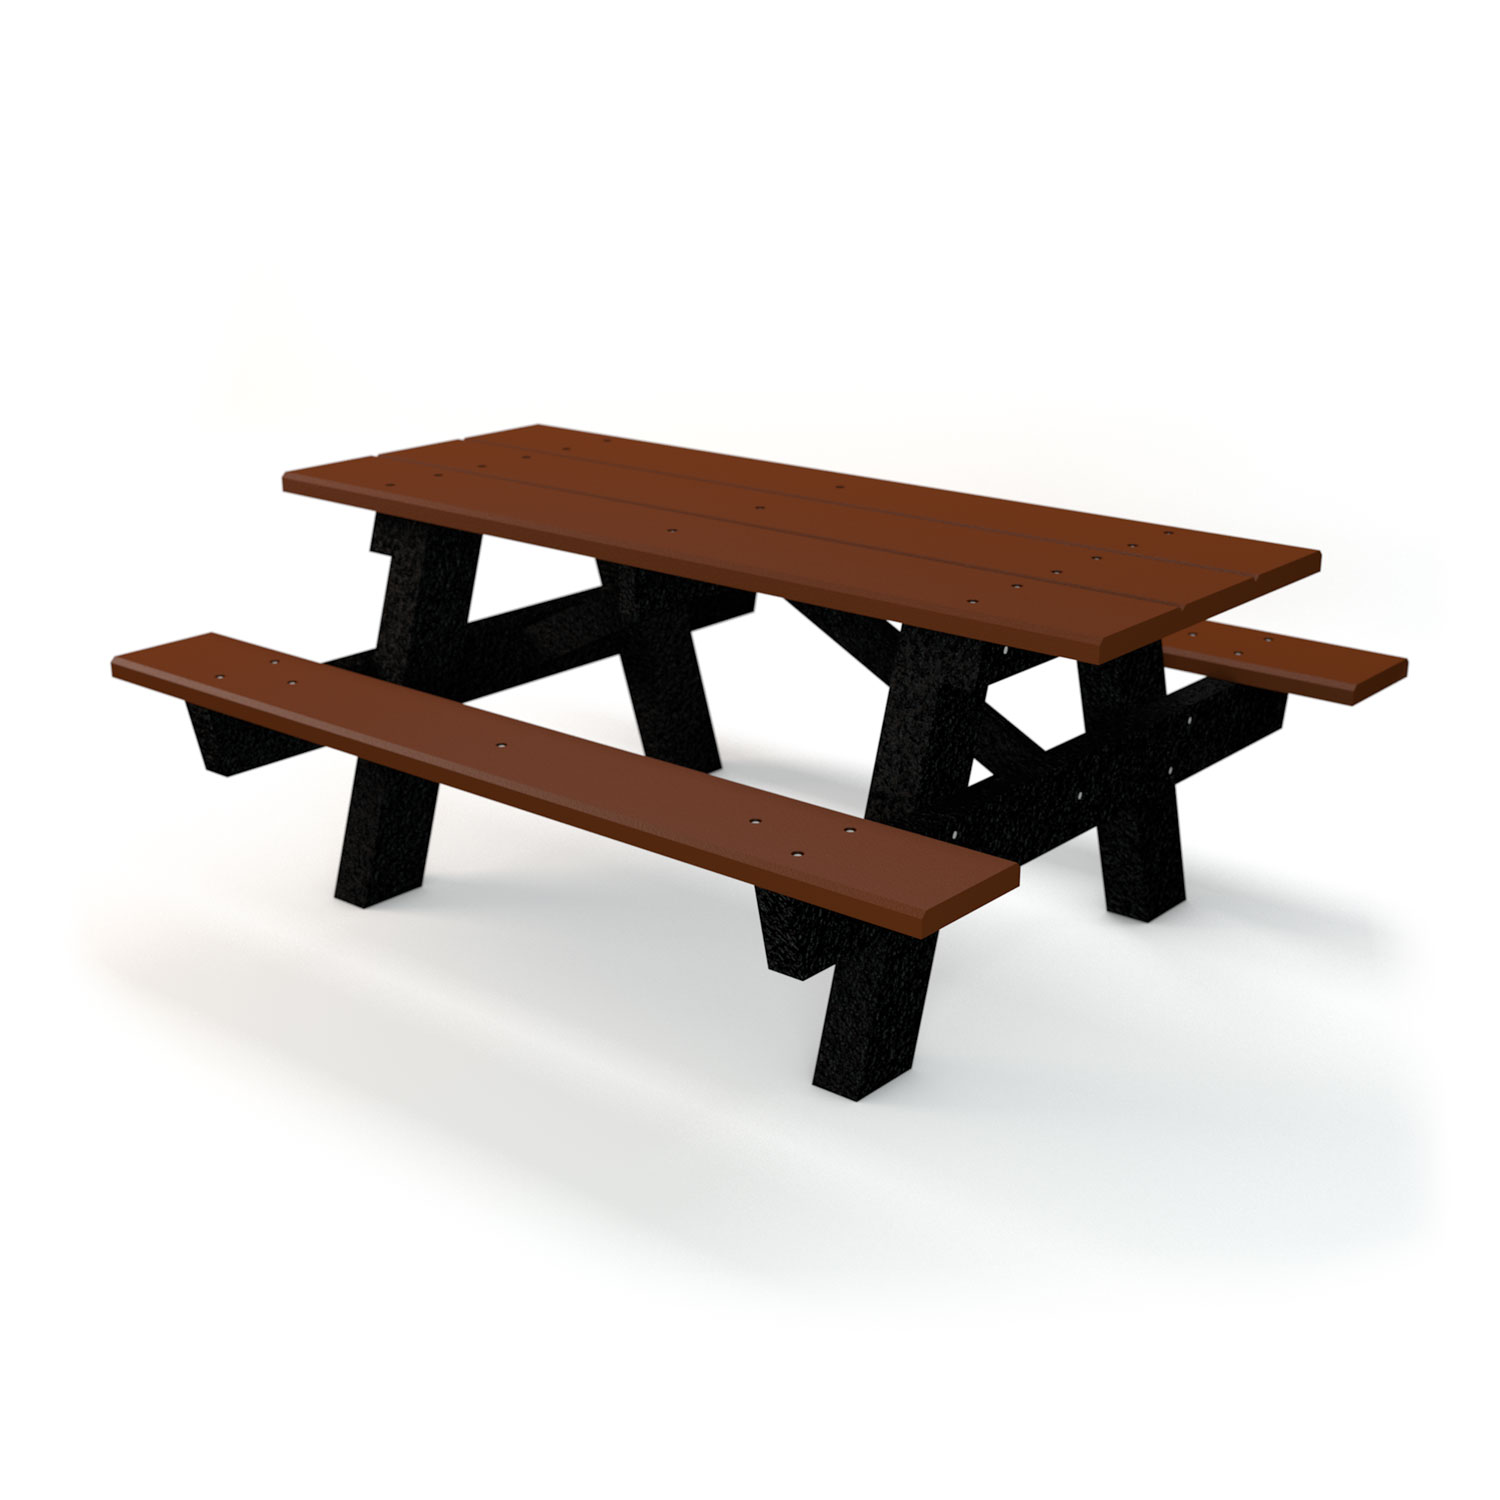 A Frame Recycled Plastic Lumber Picnic Table